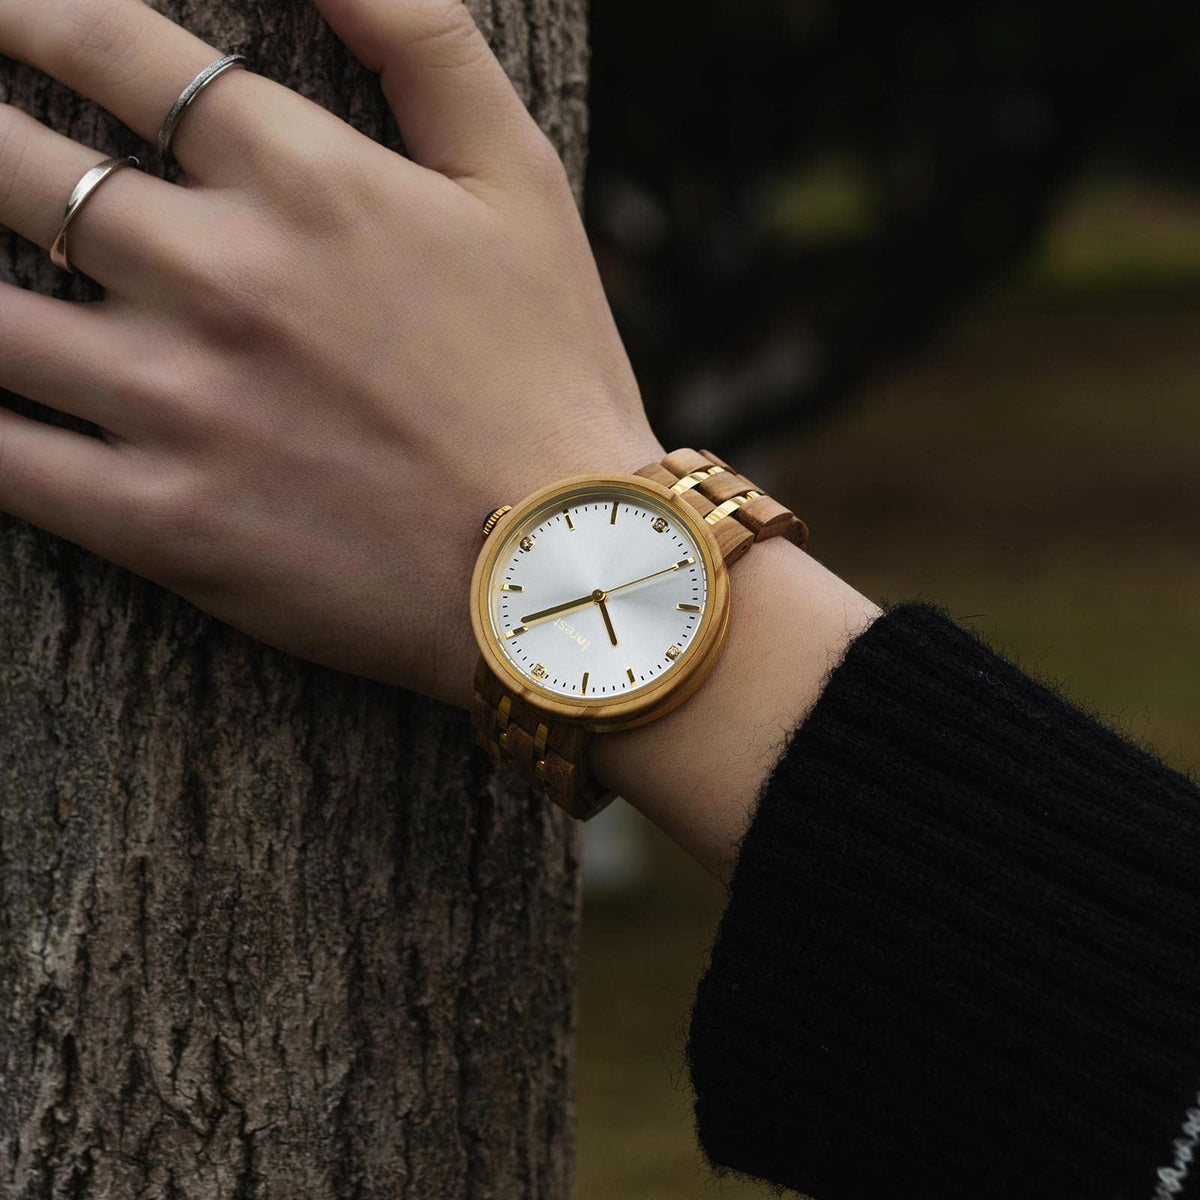 Forest watch Victoria on a womans watch as she touches a tree trunk